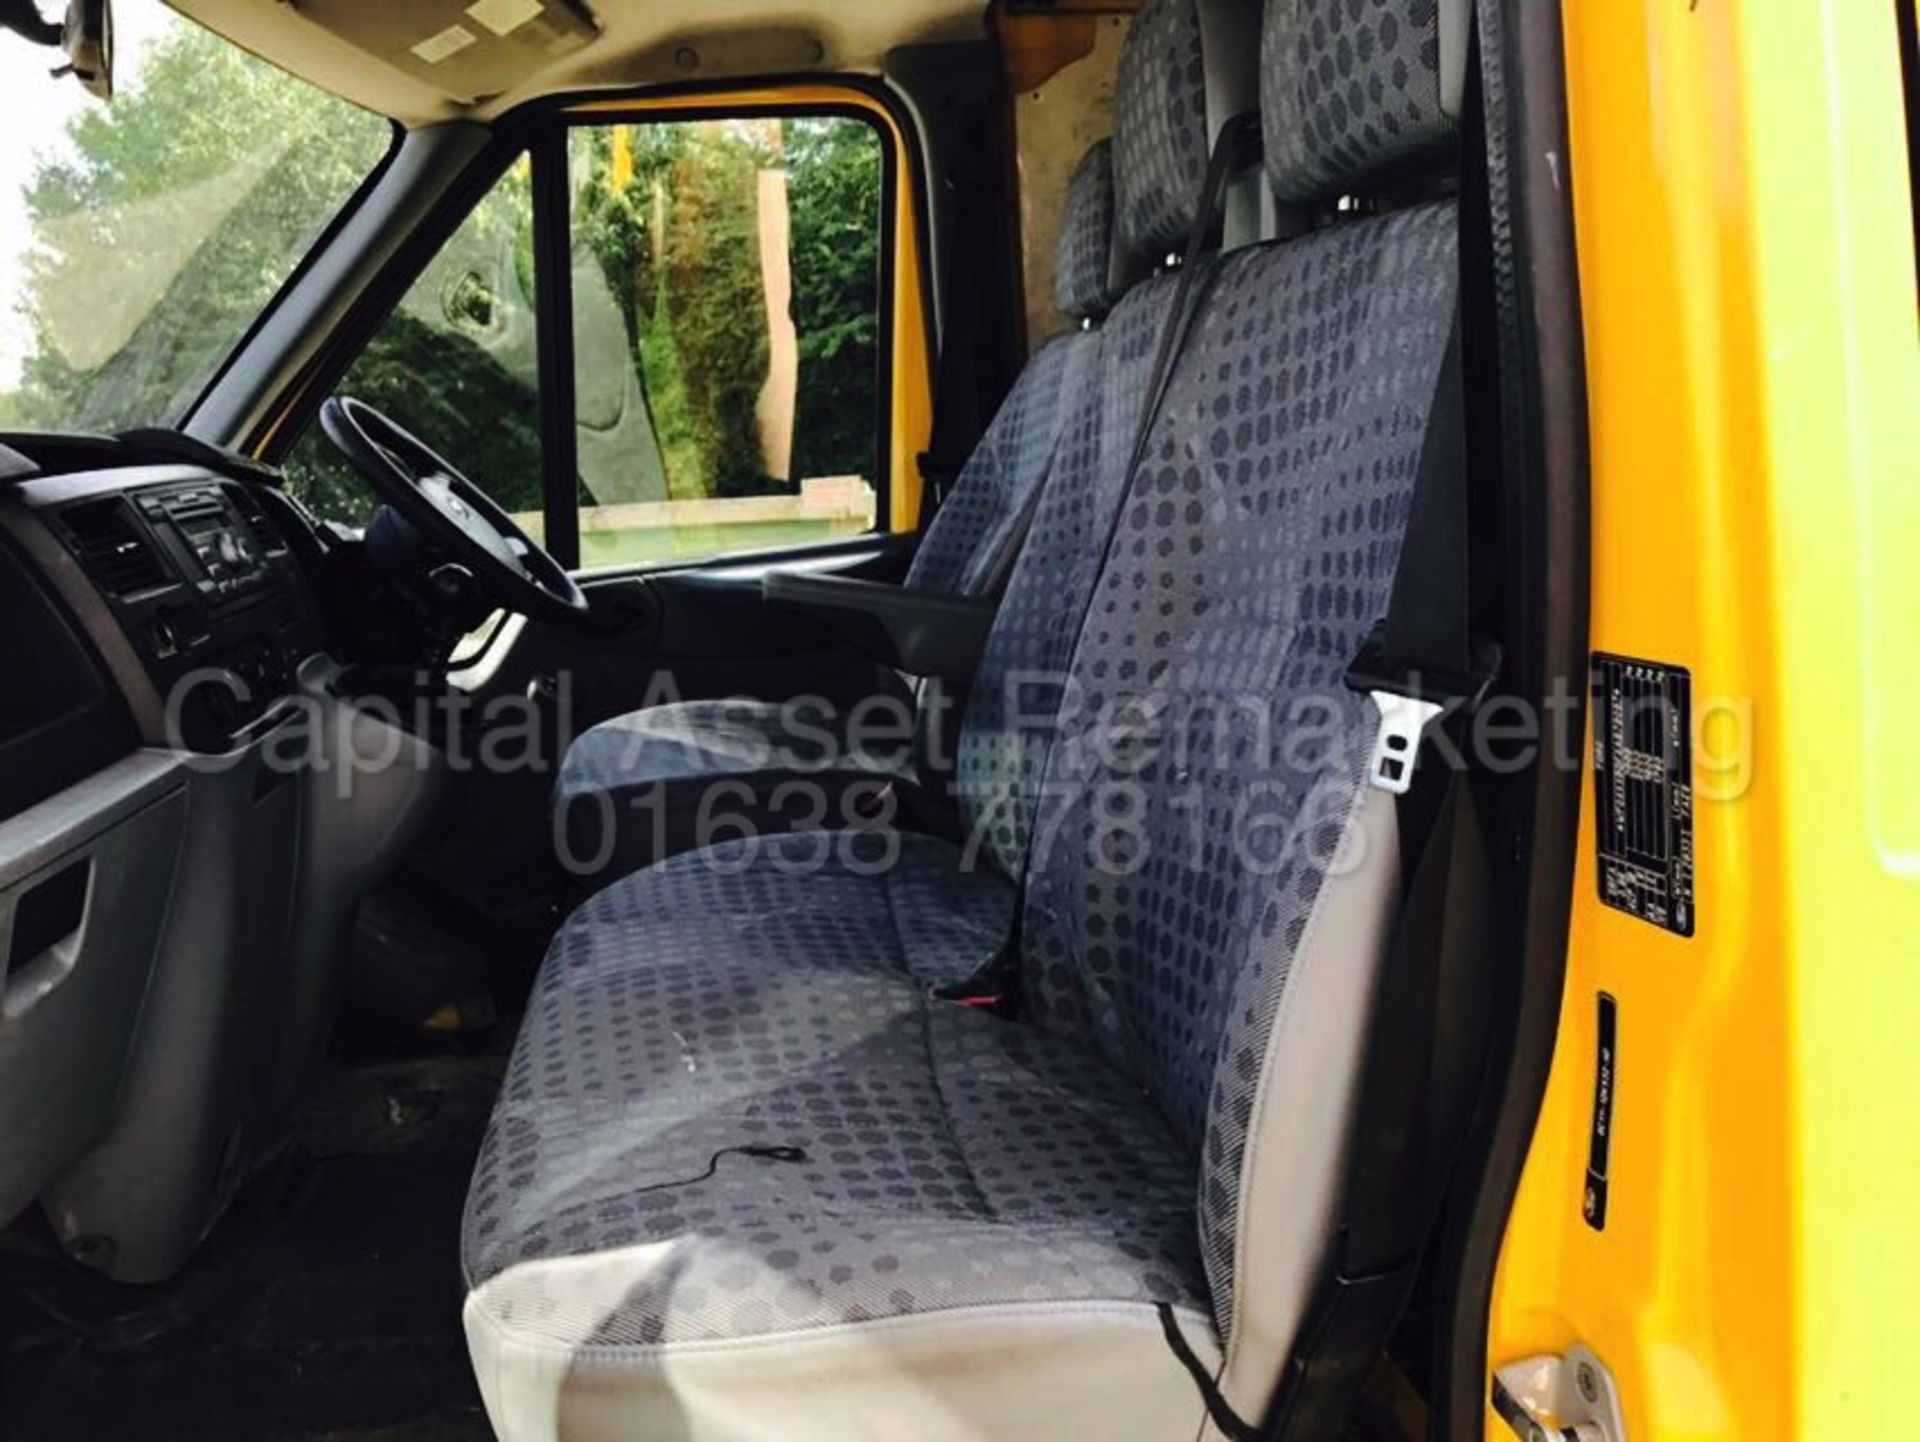 FORD TRANSIT 115 T300S FWD 'SWB' (2011 MODEL) '2.2 TDCI - 115 PS - 6 SPEED' **AIR CON** (FULL MOT) - Image 13 of 19